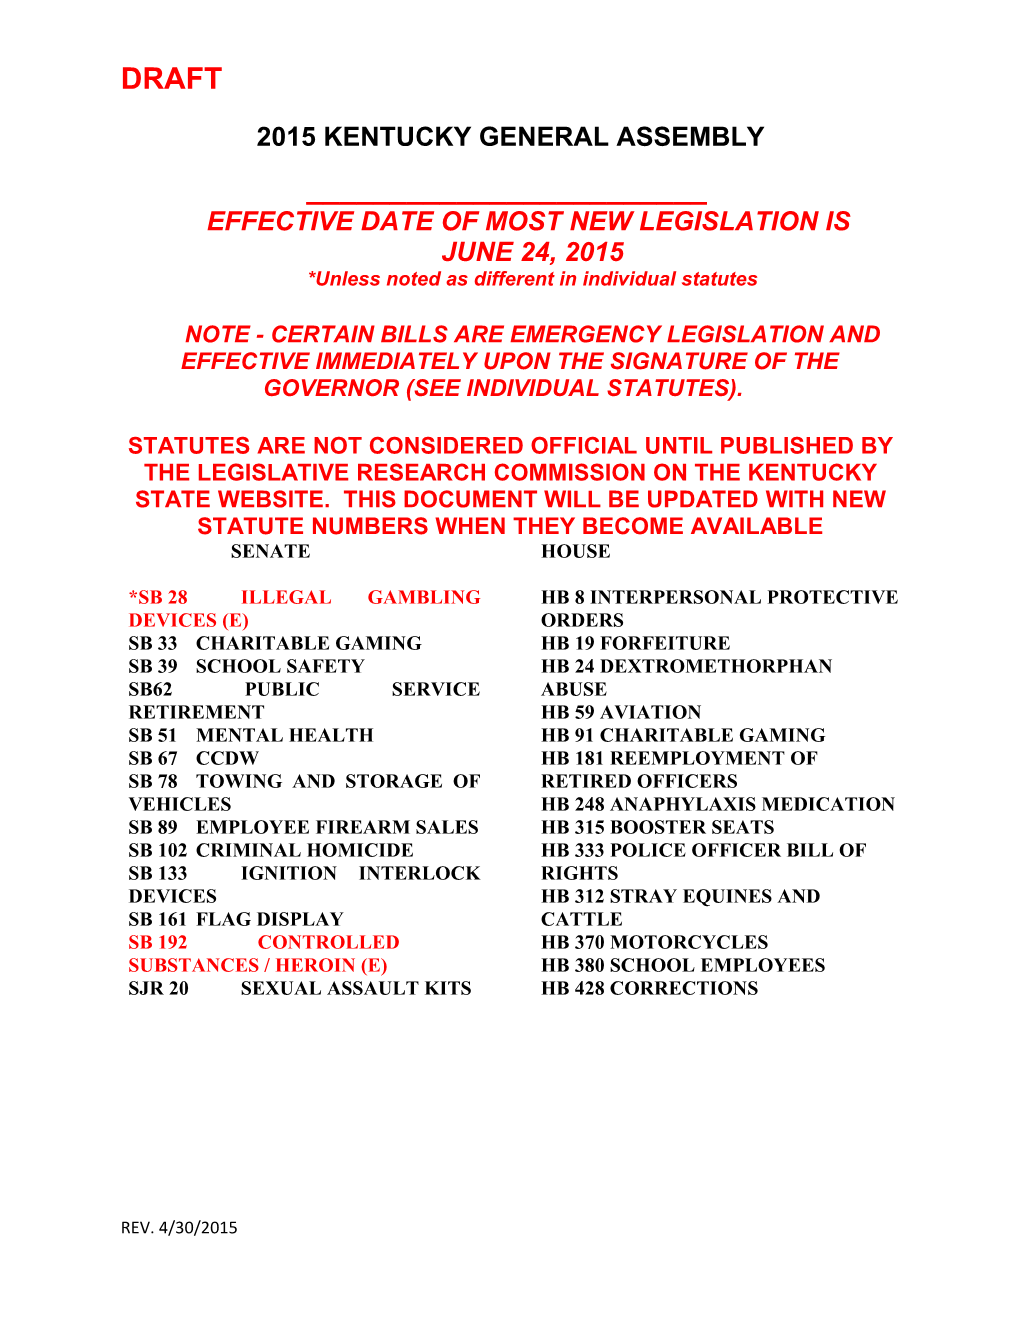 Effective Date of Most New Legislation Is